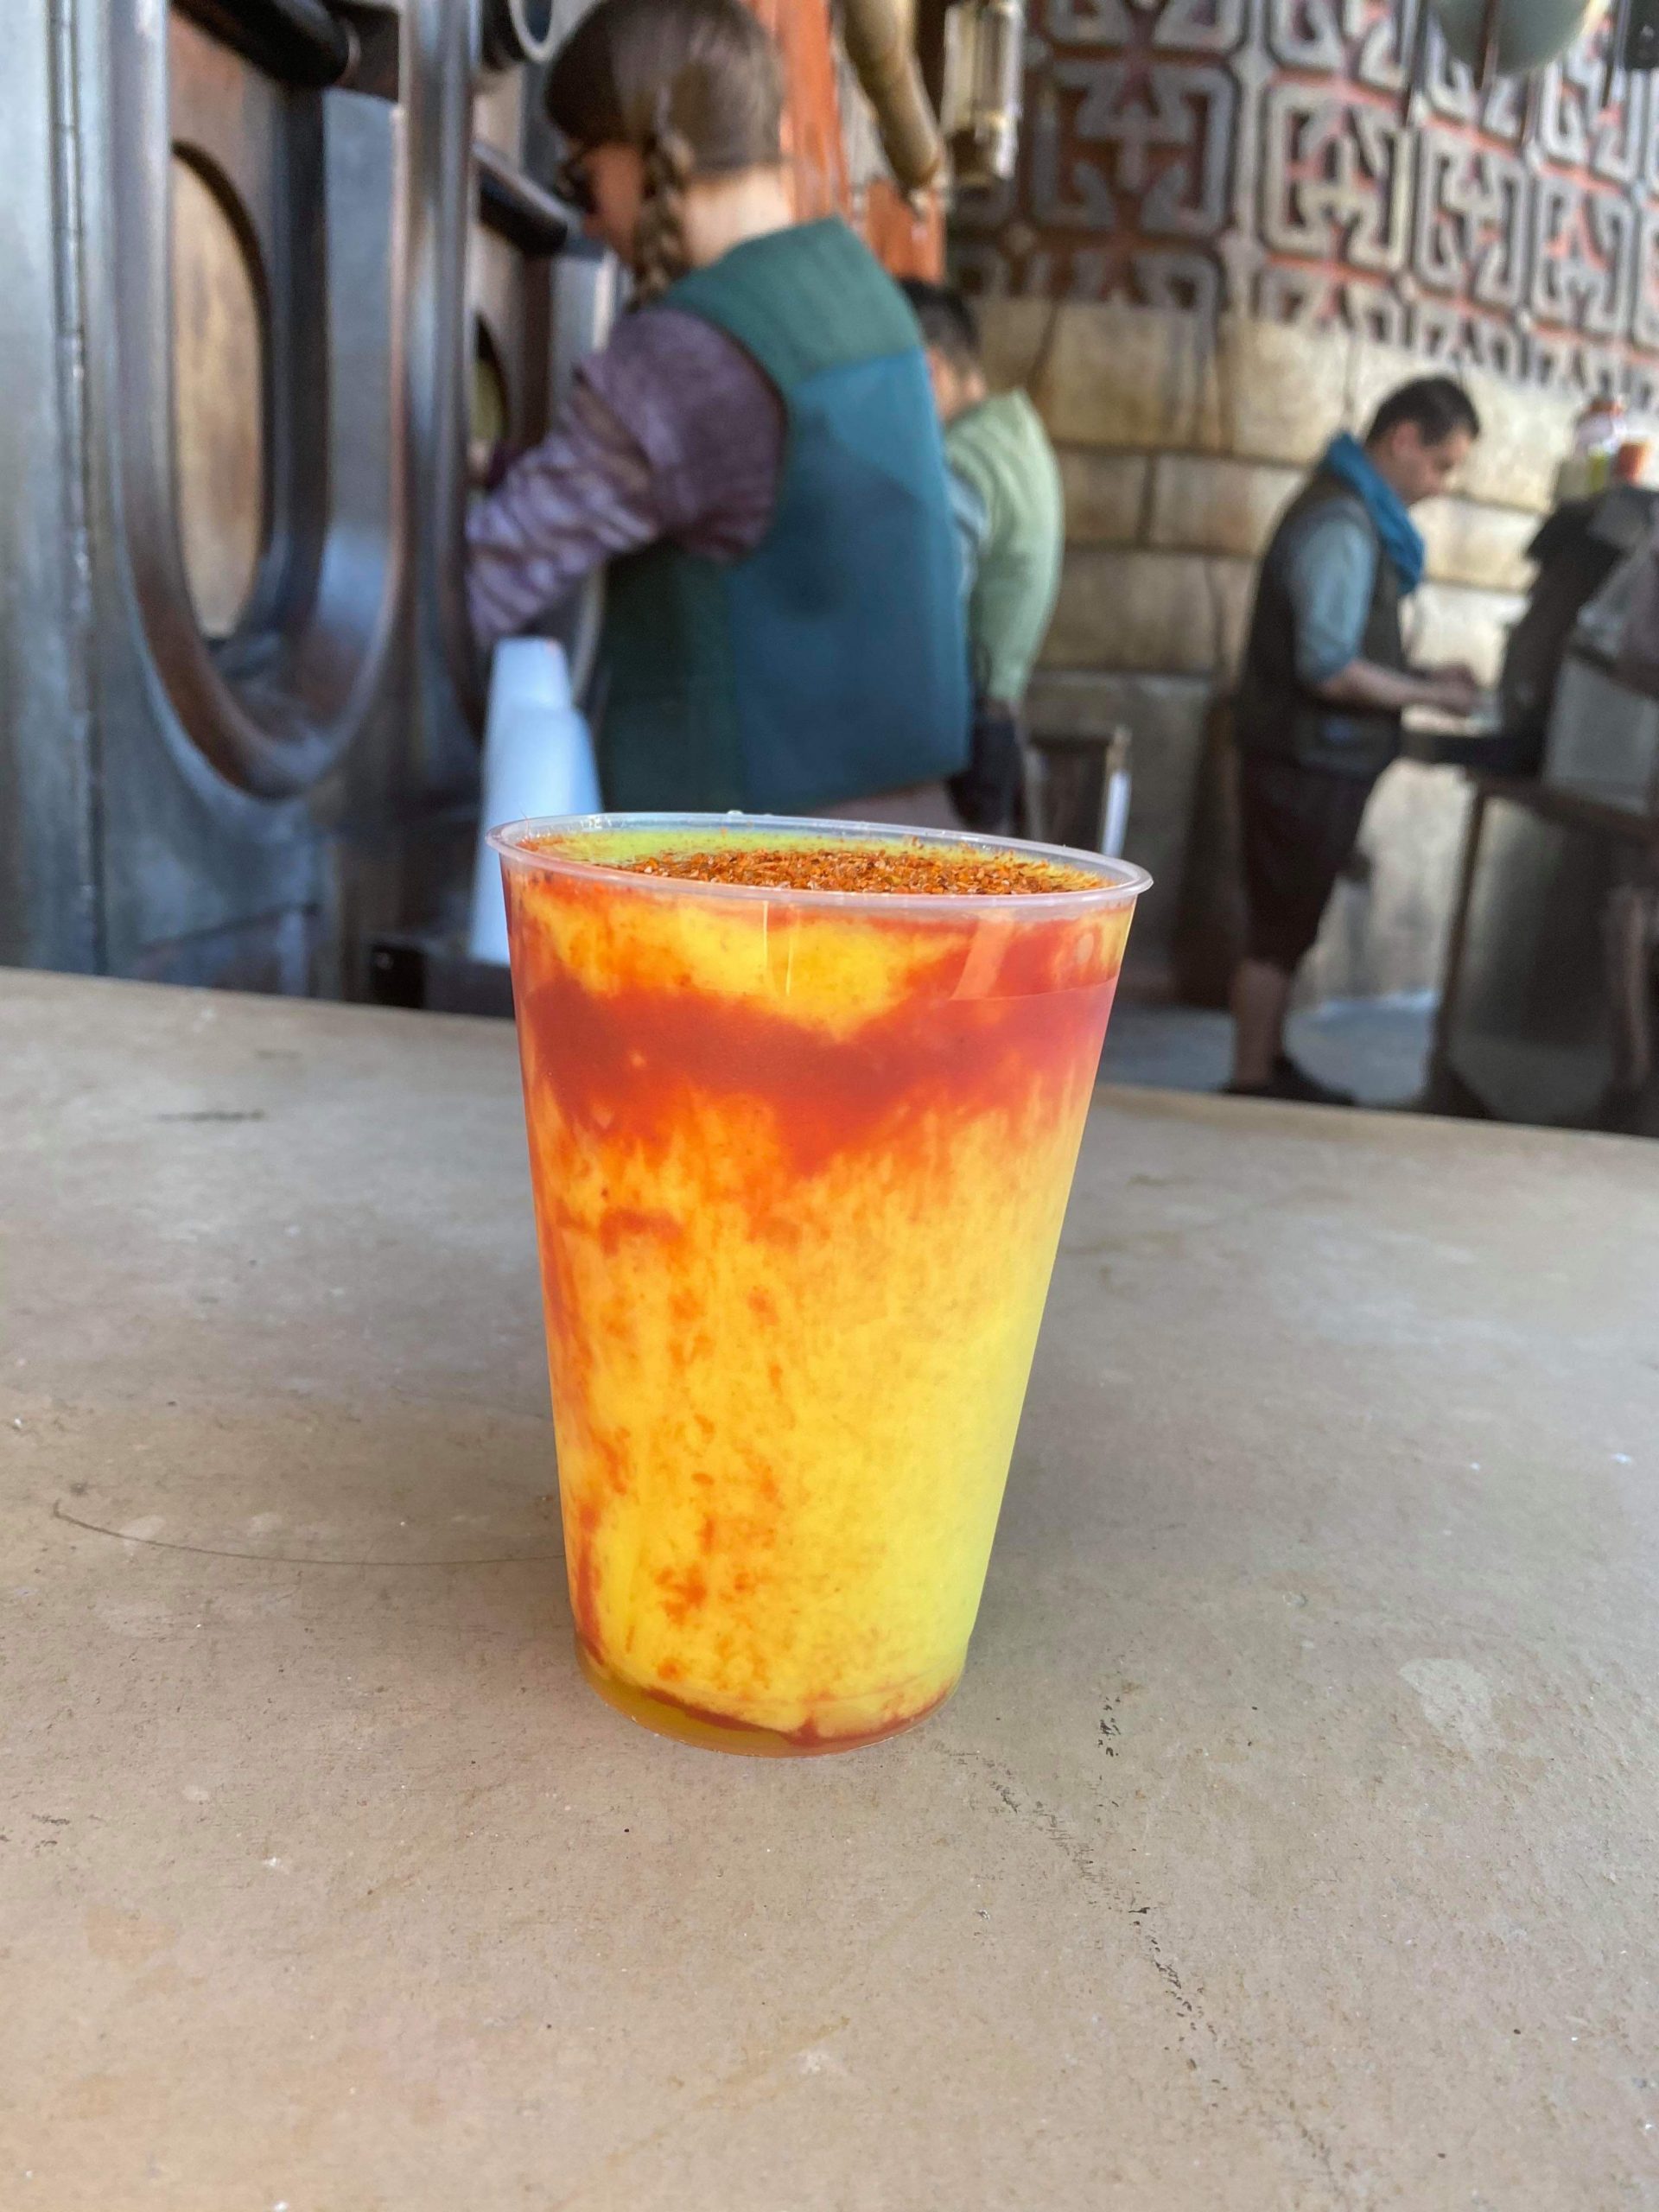 Try the New Toydarian Swirl at Galaxy’s Edge!